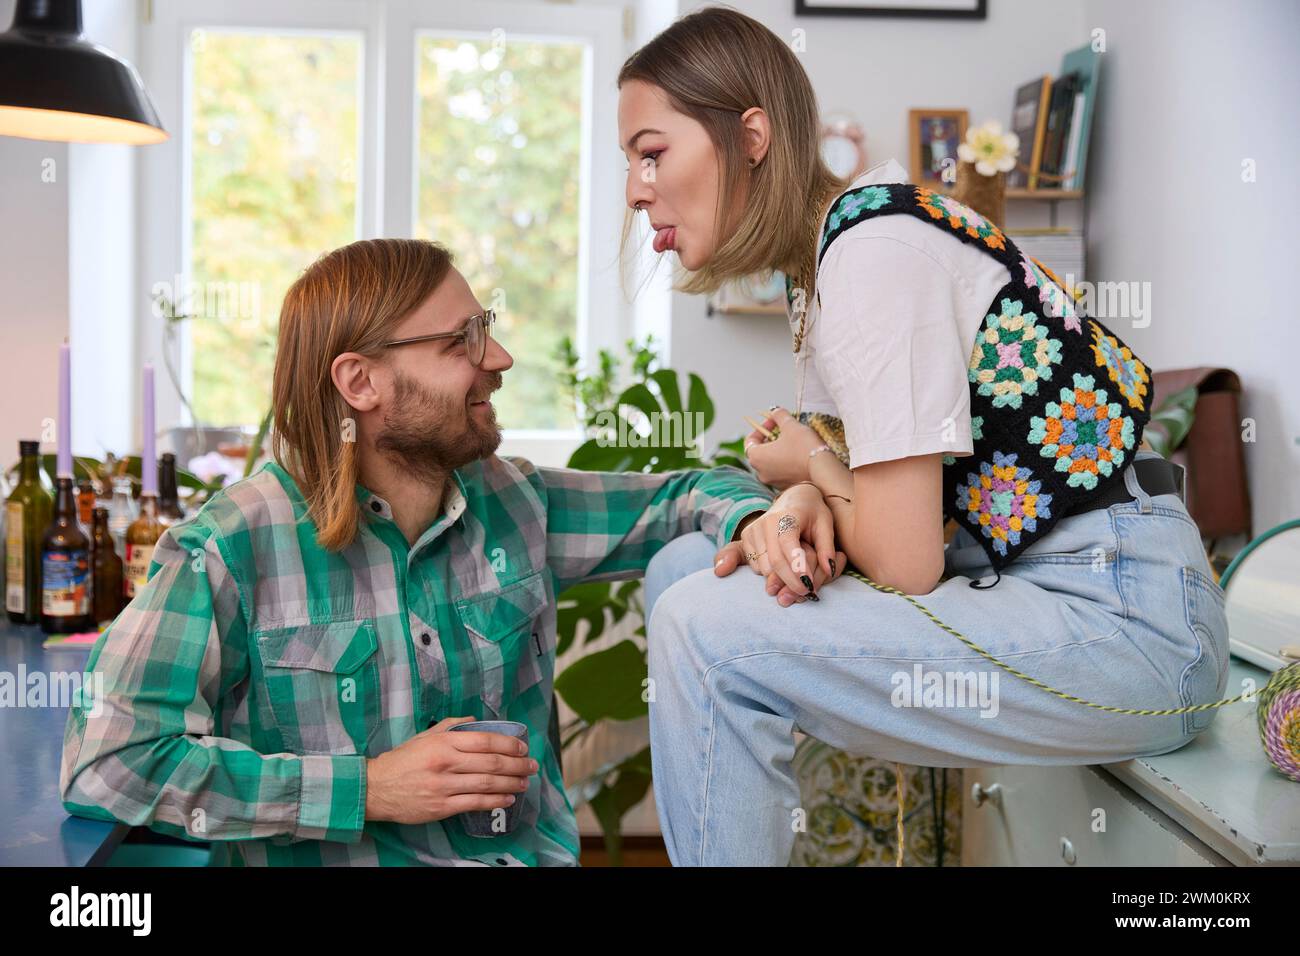 Woman teasing happy man sitting at home Stock Photo